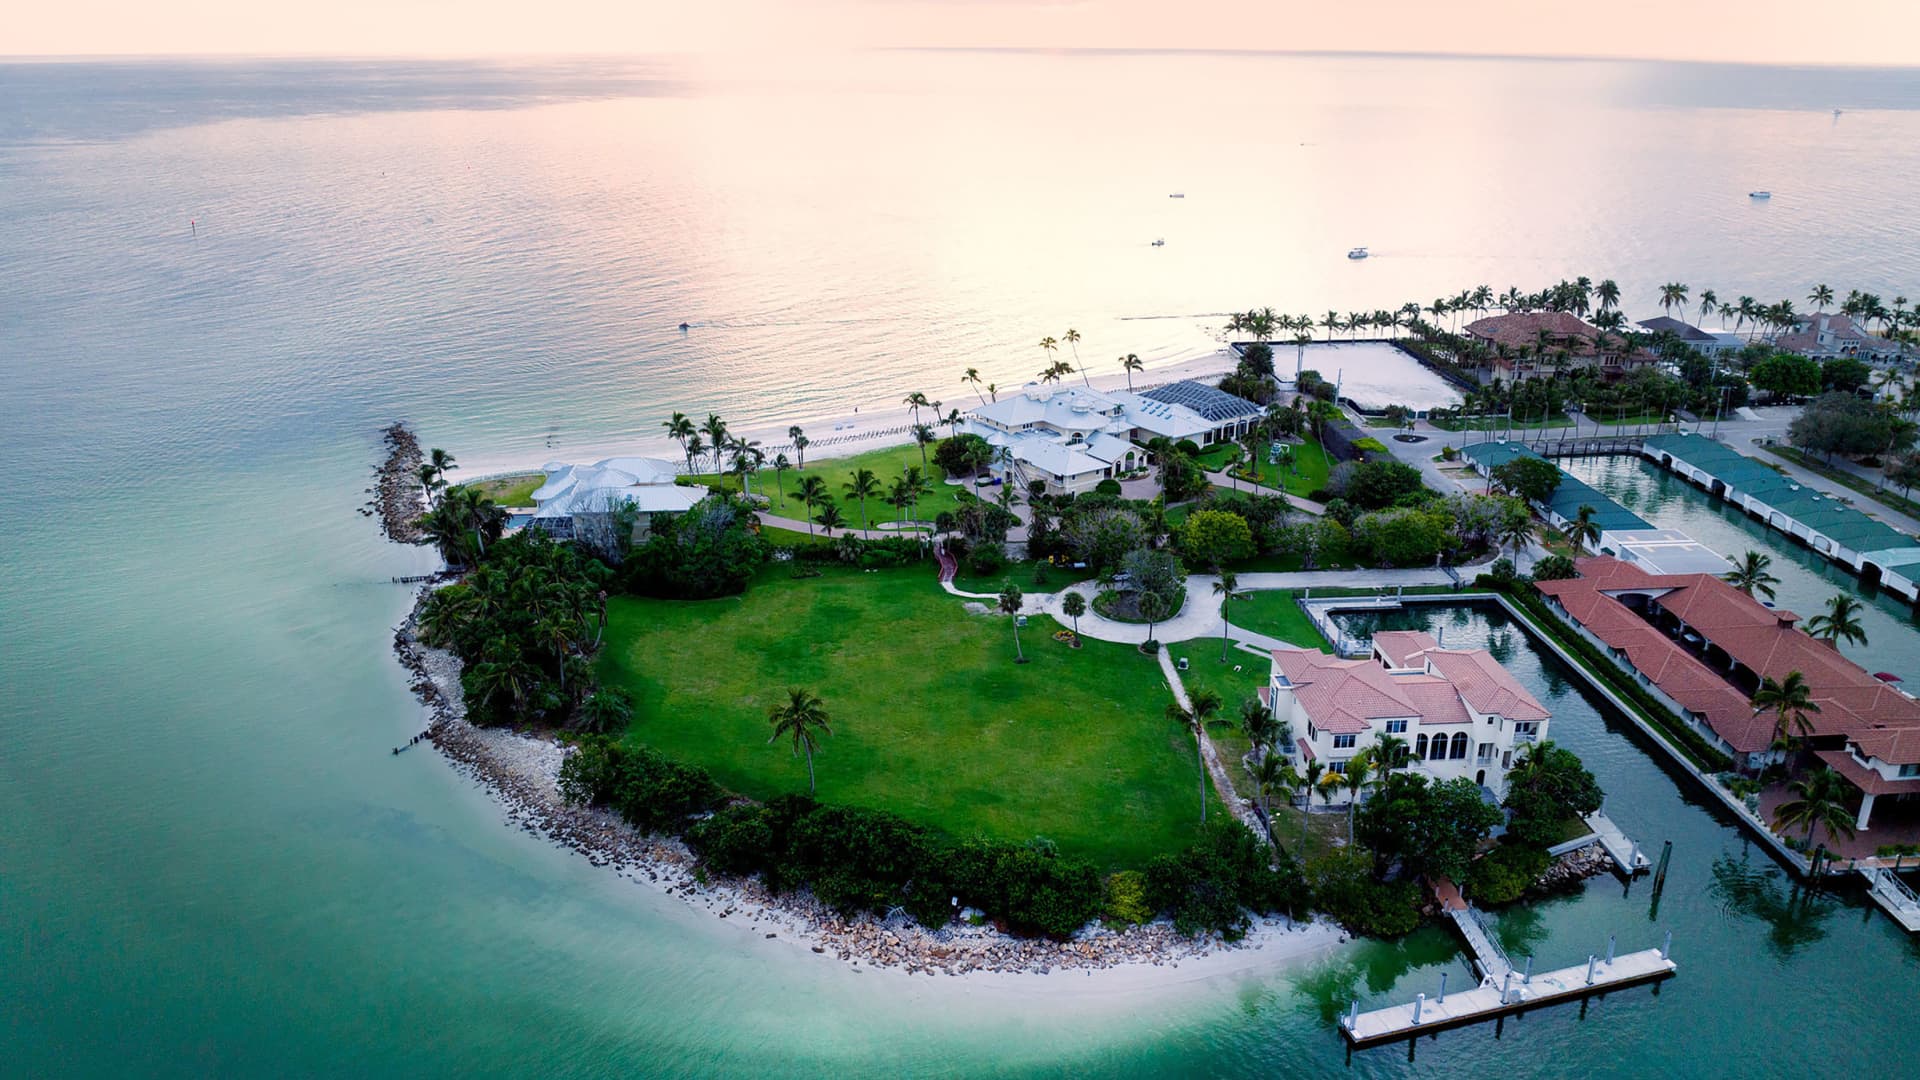 The costliest home for sale in the U.S. goes up for $295 million in Naples, Florida